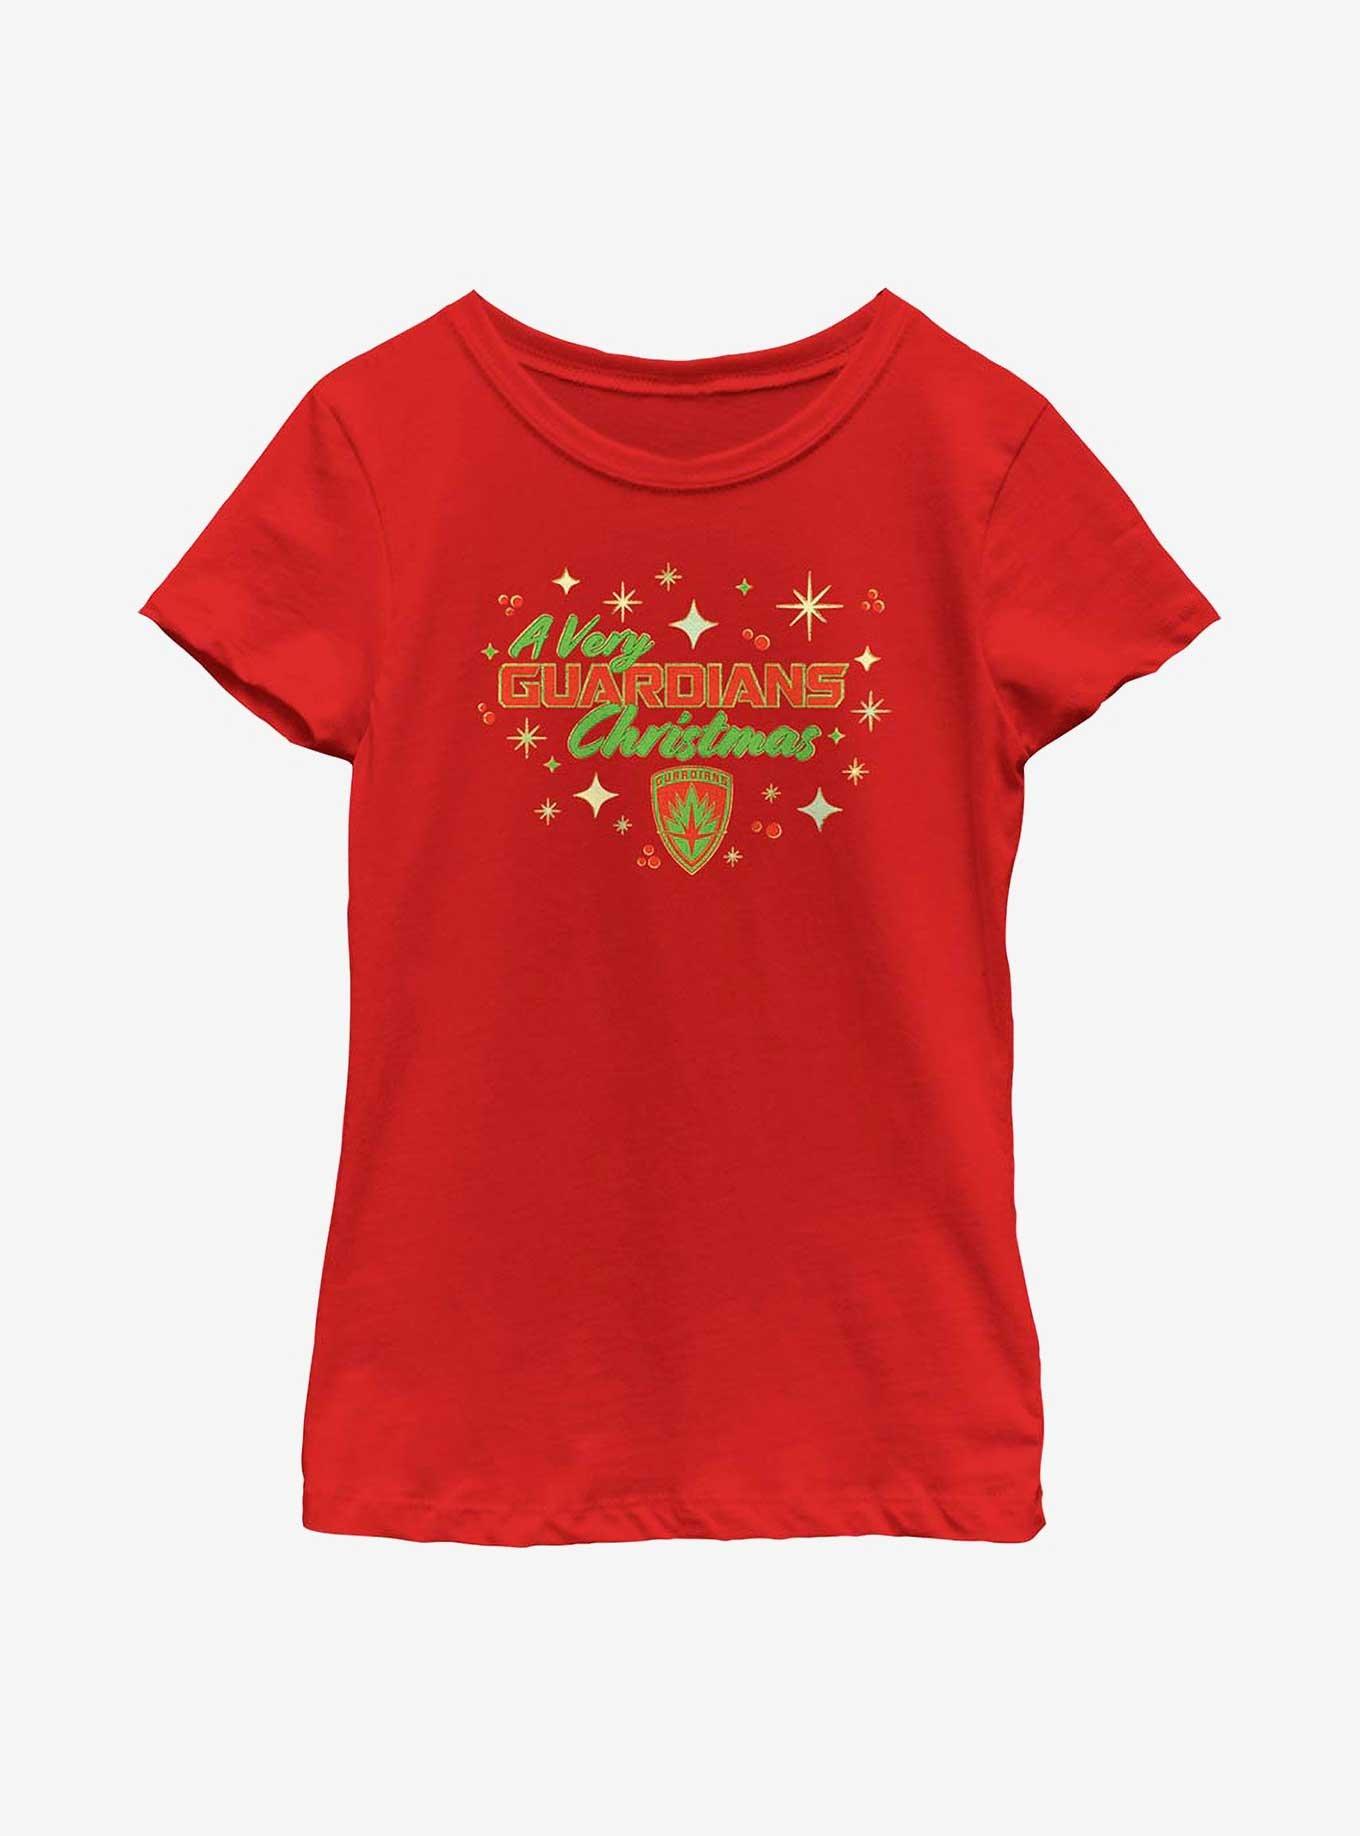 Marvel Guardians of the Galaxy Holiday Special A Very Guardians Christmas Youth Girls T-Shirt, RED, hi-res